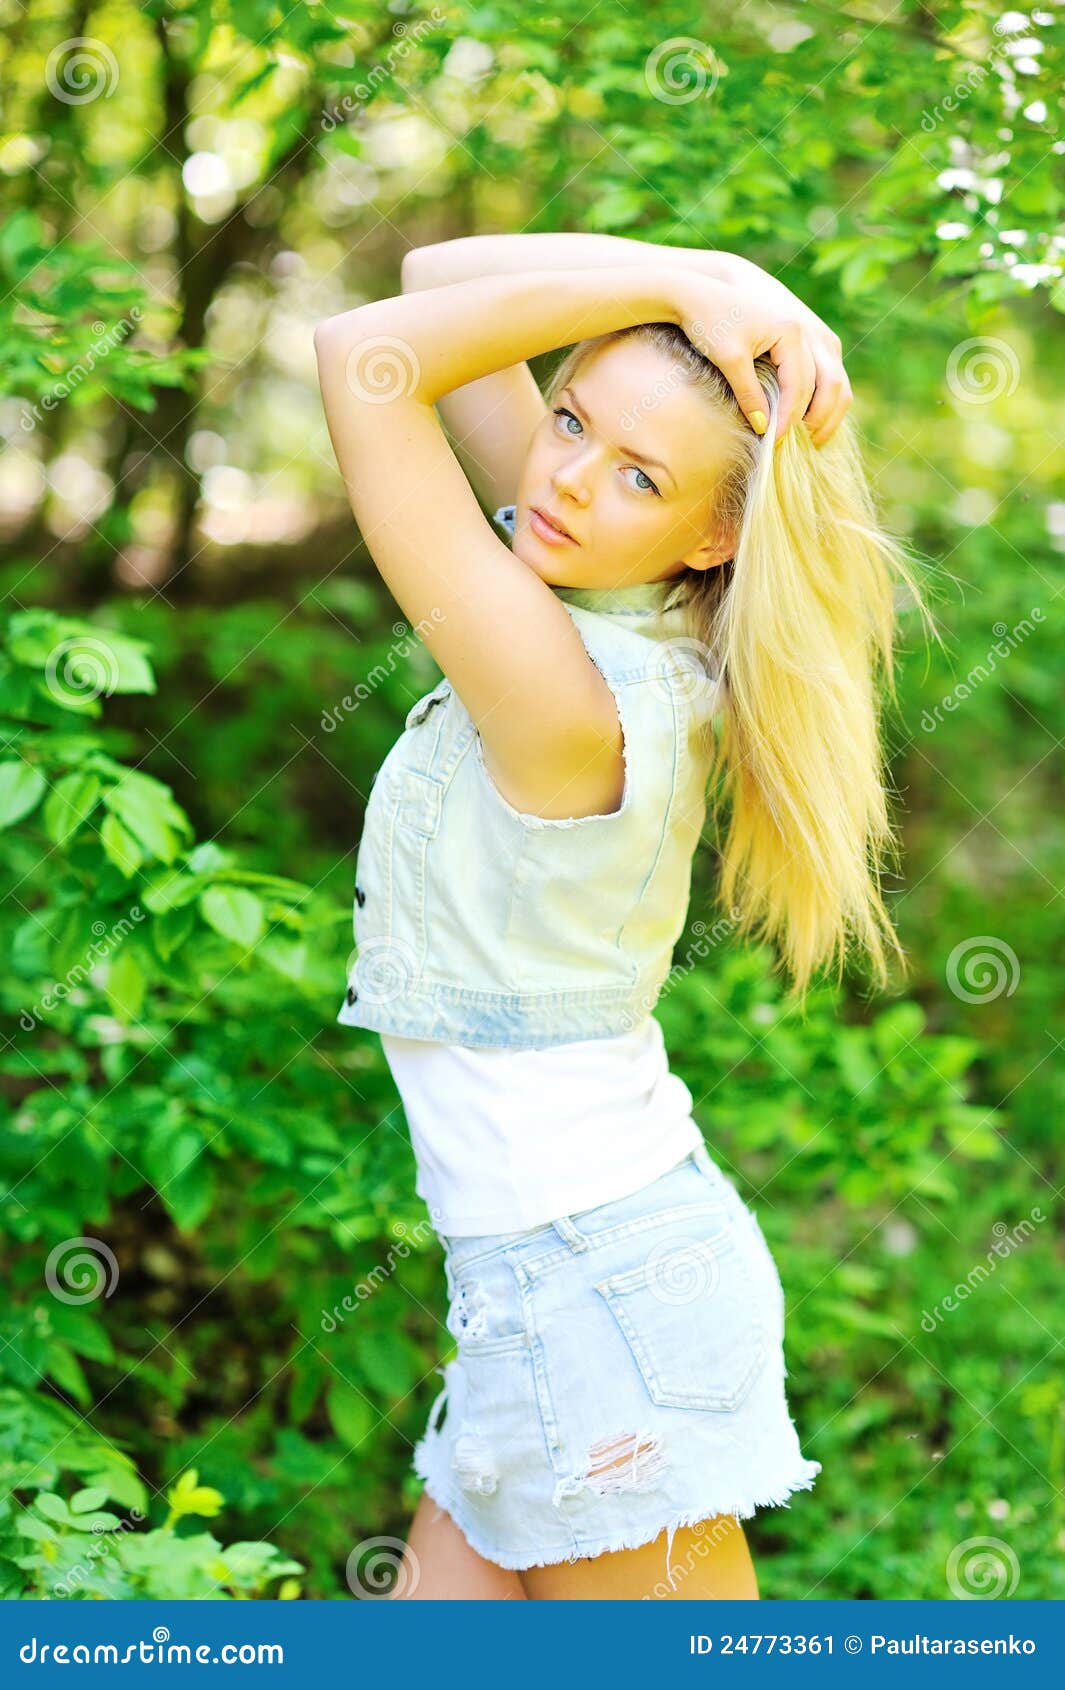 Young Woman Posing Outdoors Stock Image - Image of light, model: 24773361